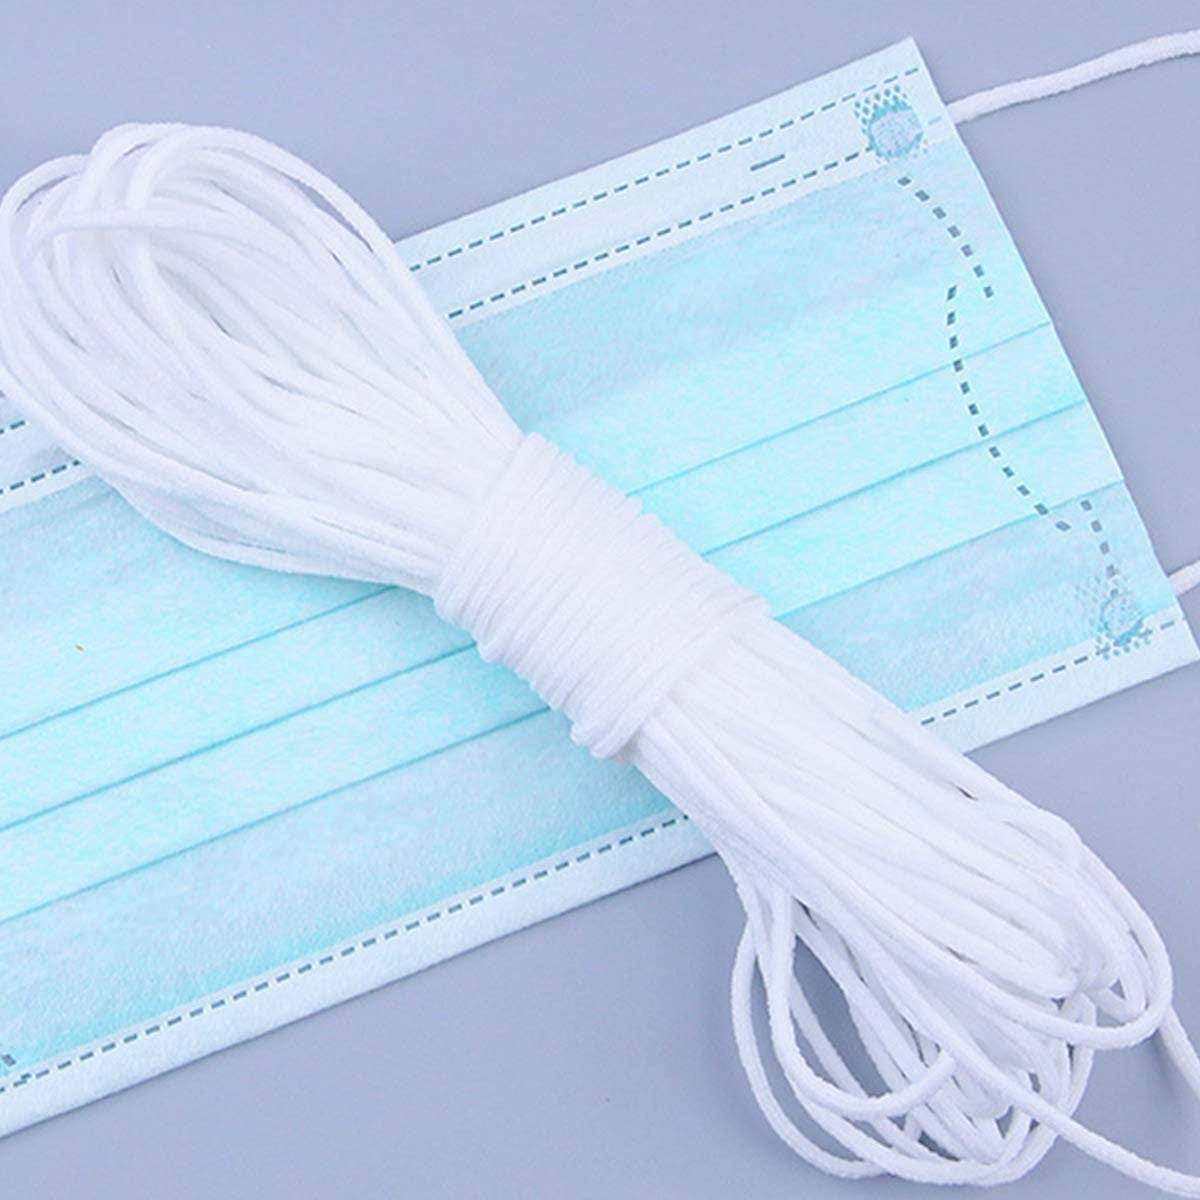 DJDZ 100 Yards 1/8 inch White Elastic Cord/Elastic Band/Elastic Rope/Elastic Strap/Bungee/Heavy Stretchy Ear Tie Rope Handmade String for Sewing 